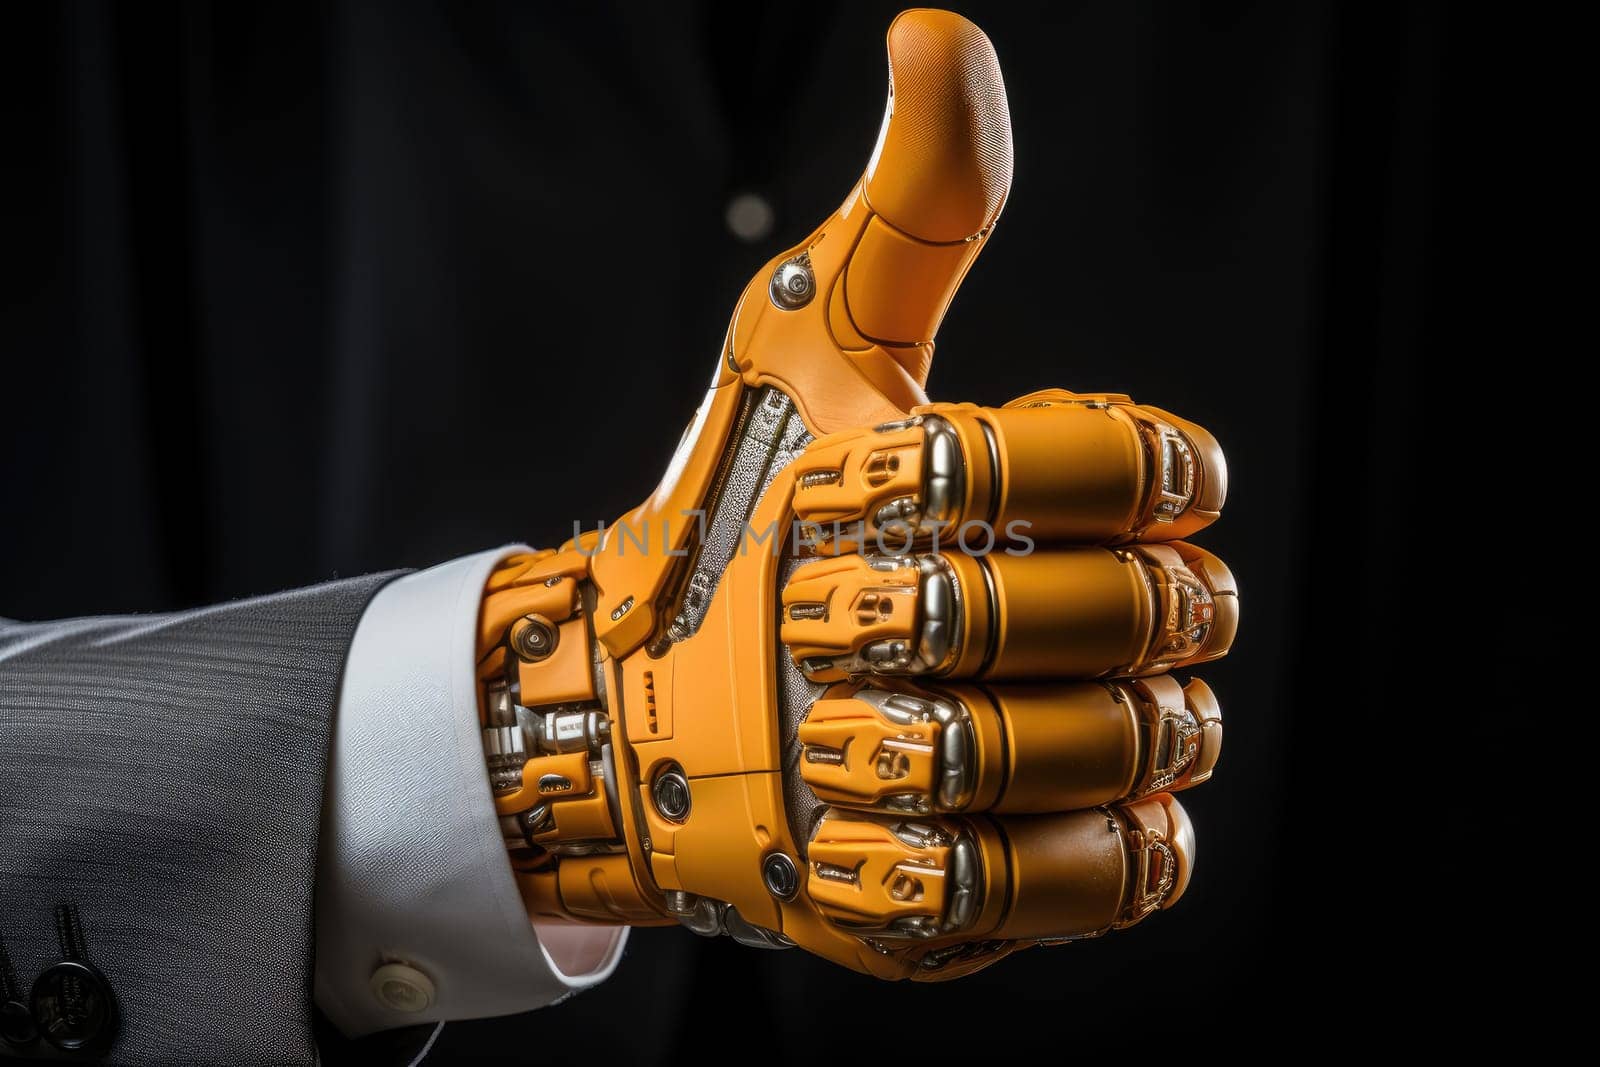 Modern AI Robot Hand With Gesture Of Recognition - Thumbs Up. The future becomes a reality before our eyes